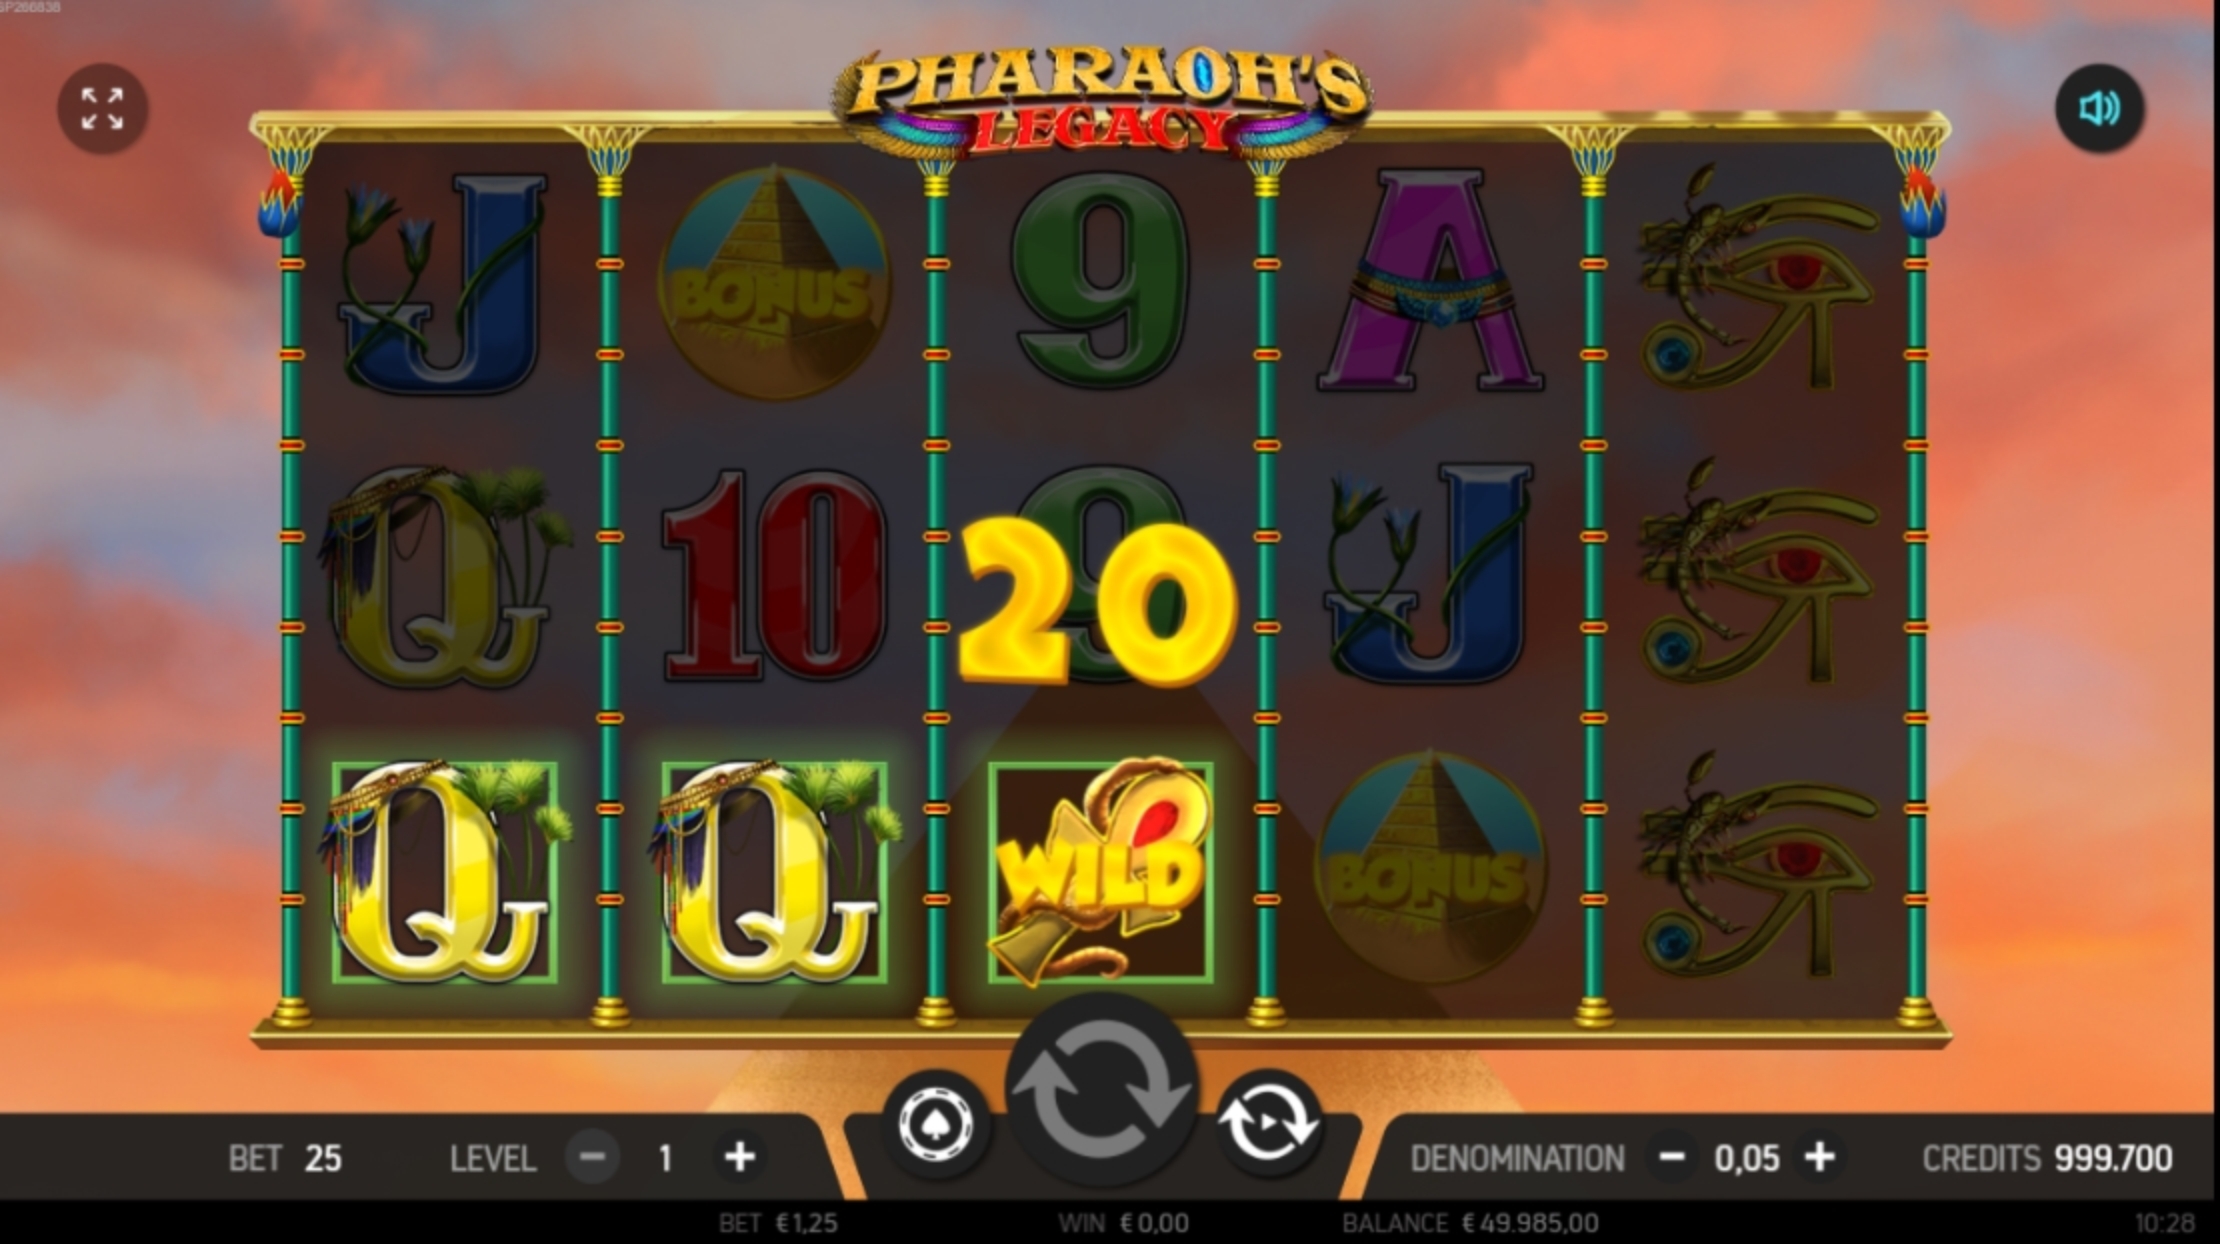 Win Money in Pharaoh's Legacy Free Slot Game by FBM